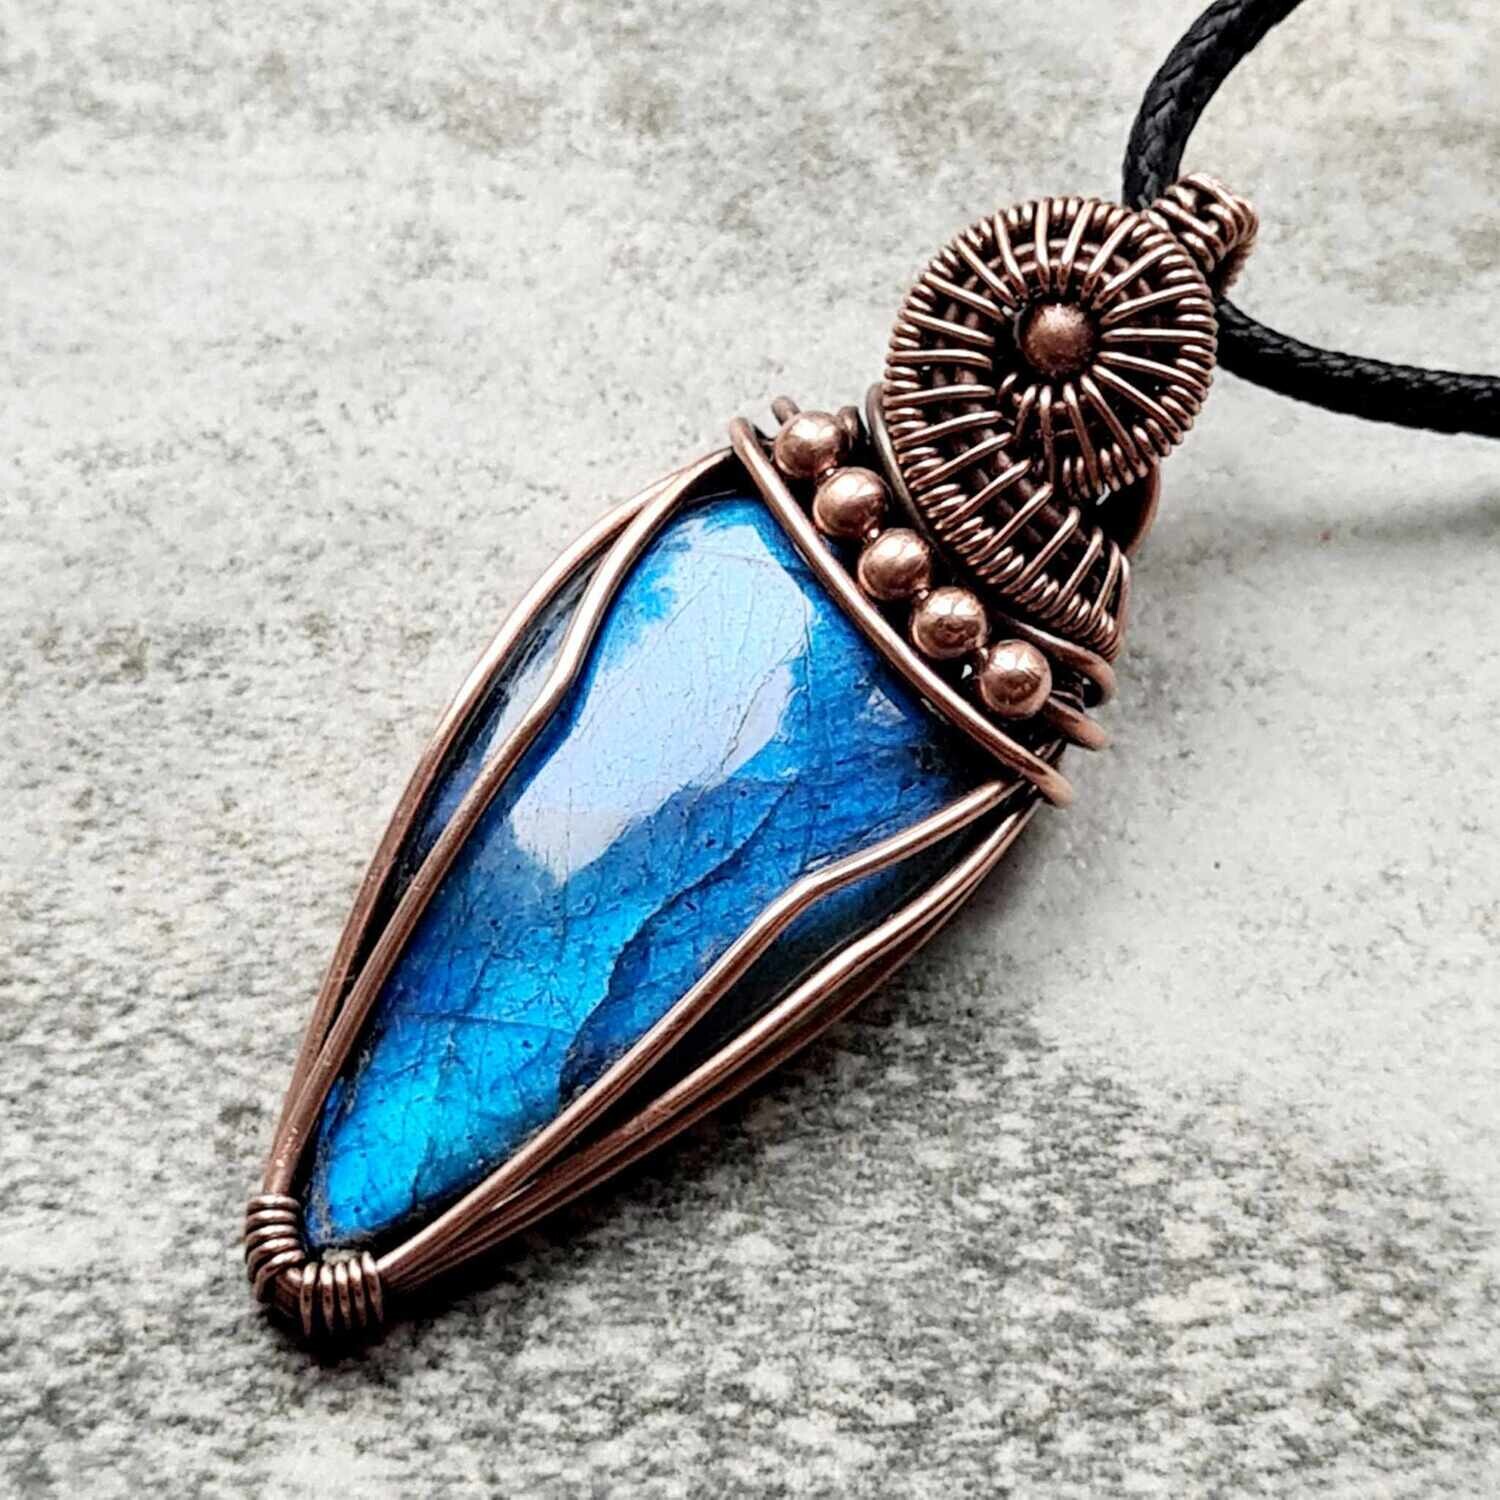 Flashy Blue Labradorite with beads pendant with chain.